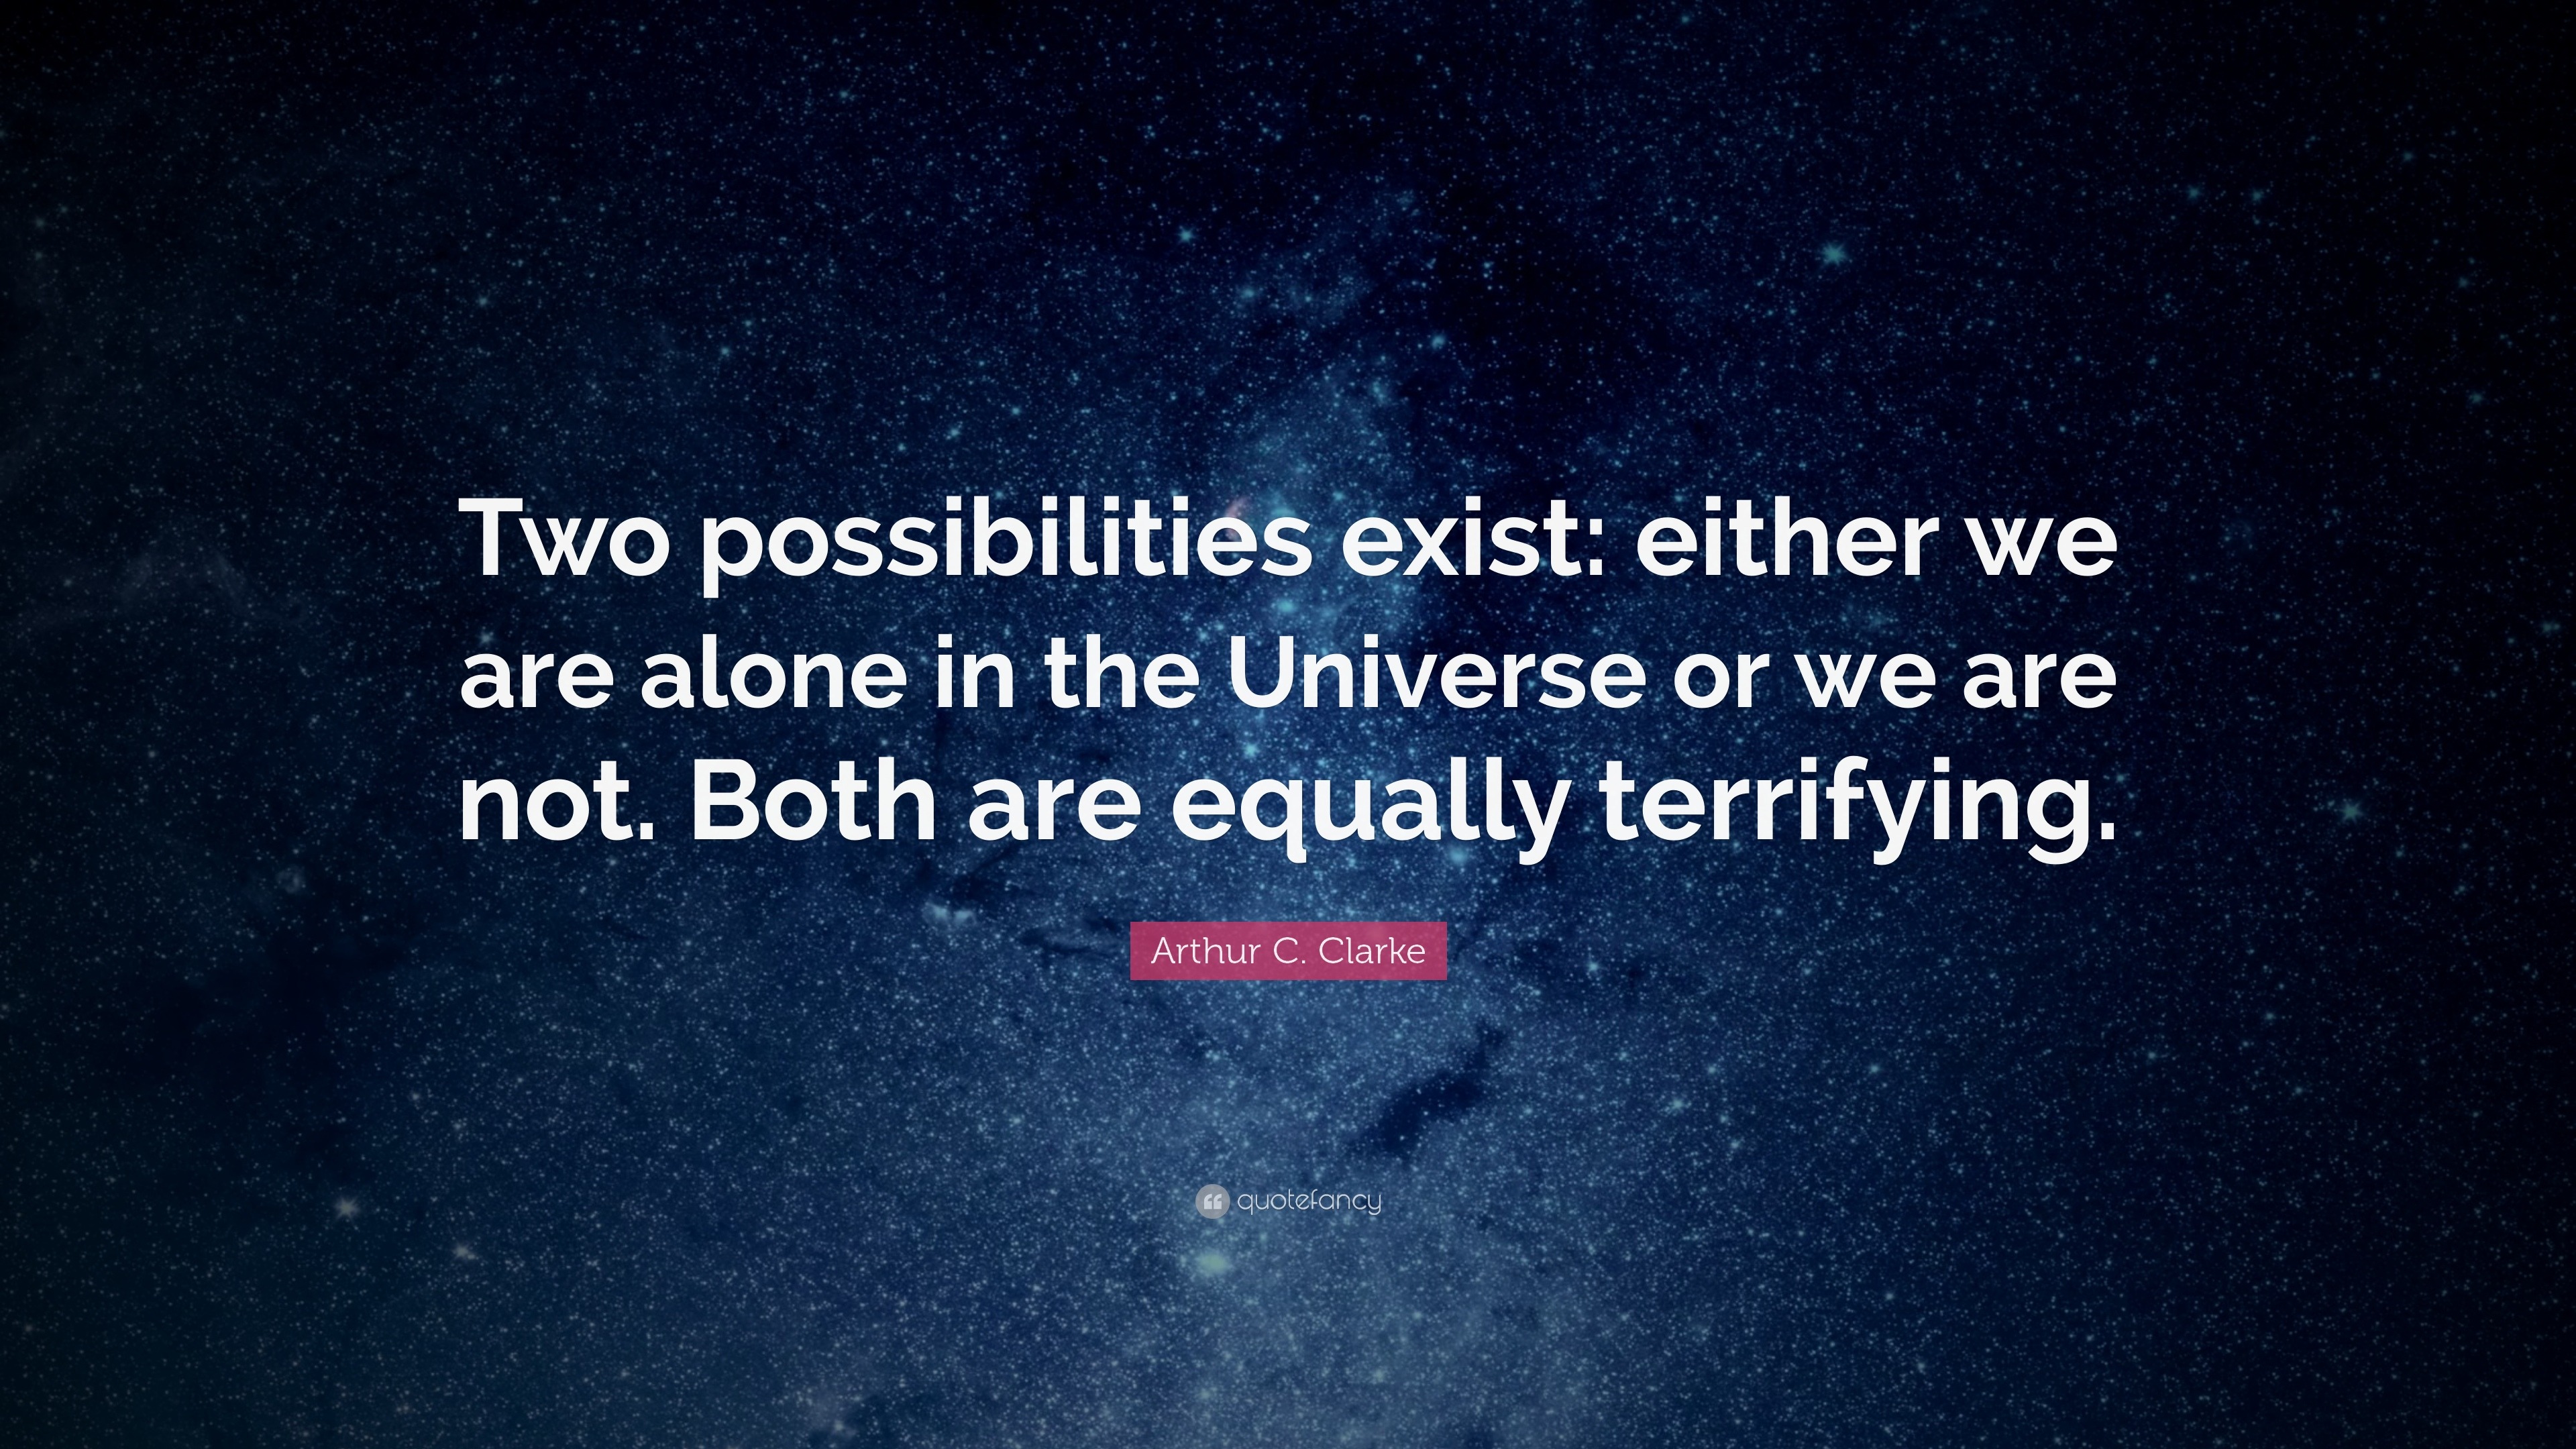 Stephen Hawking Quotes Hd Wallpaper The Universe In Nutshell  फट शयर